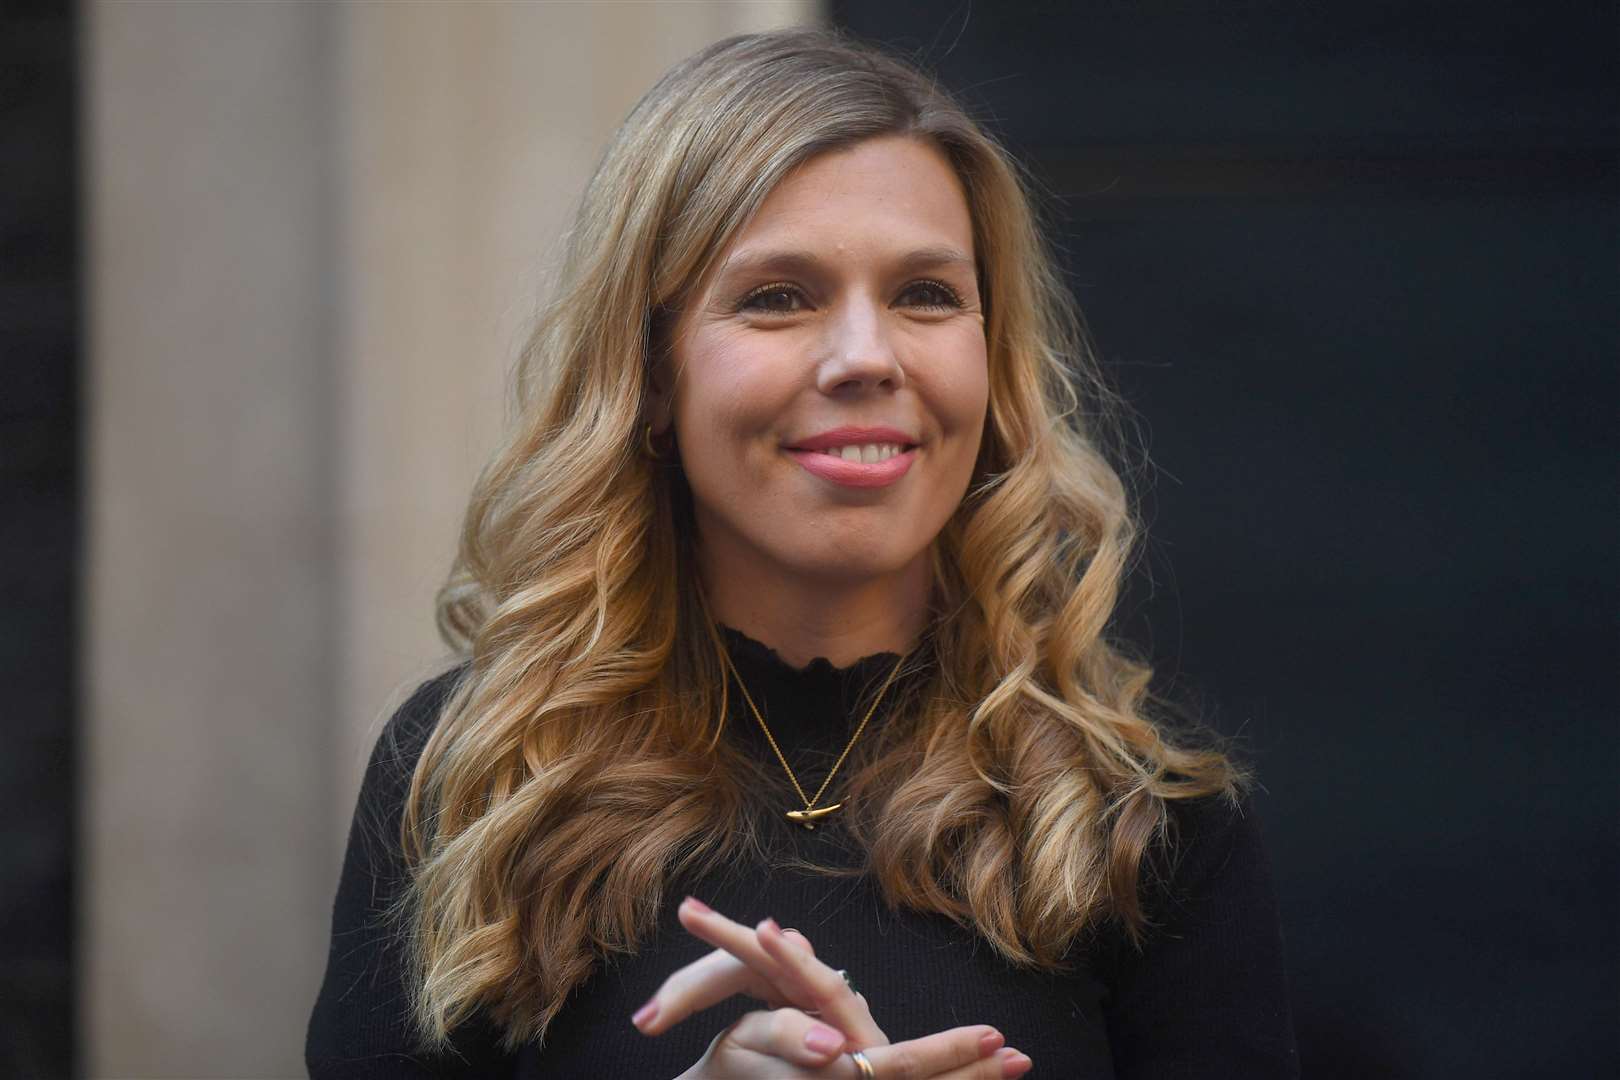 Boris Johnson’s fiancee Carrie Symonds was said to have opposed Mr Cain’s appointment as chief of staff (Victoria Jones/PA)